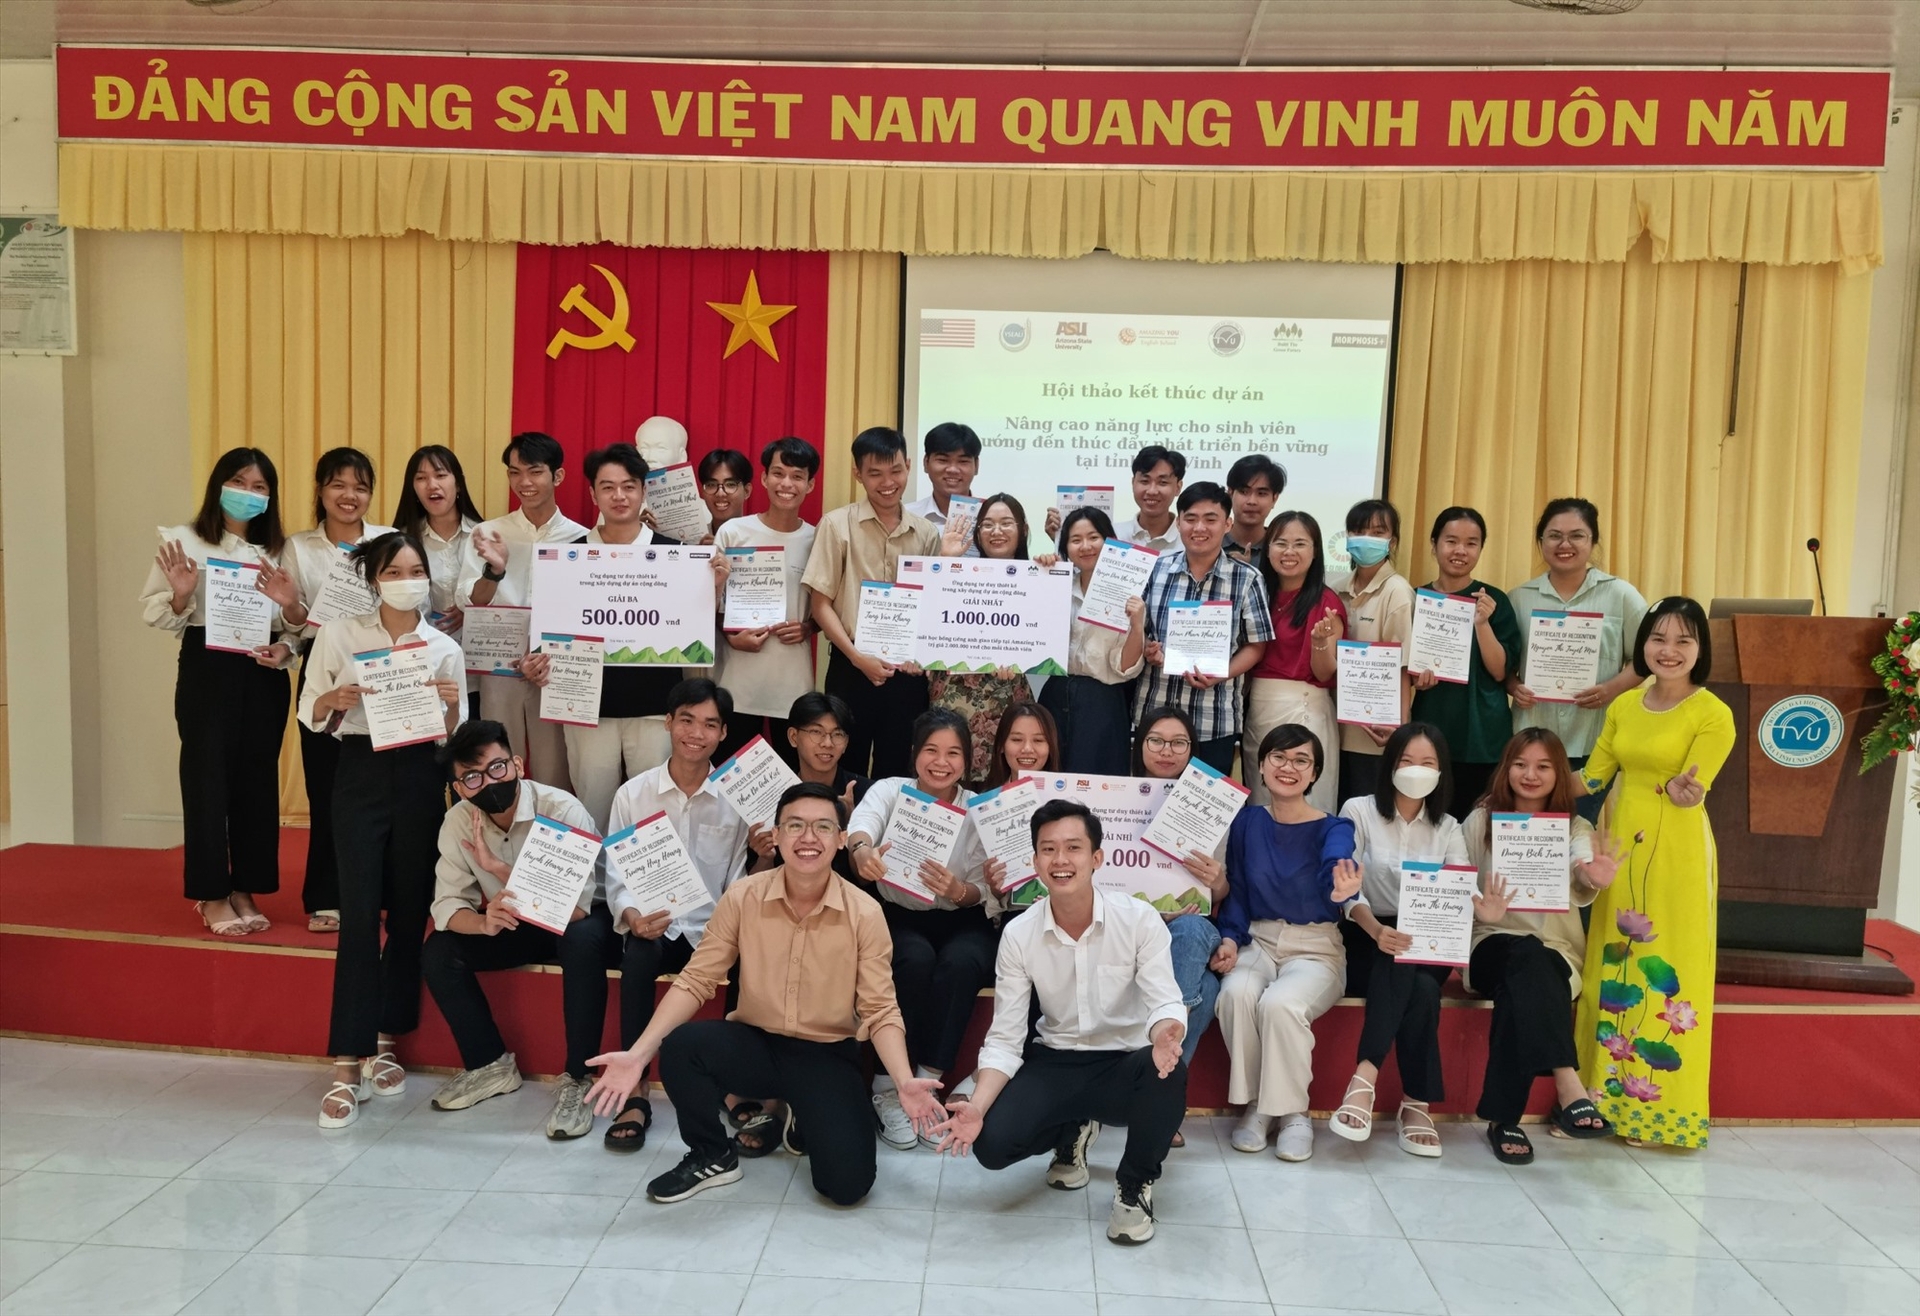 Students of Tra Vinh University participate in a training program sponsored by the USA.